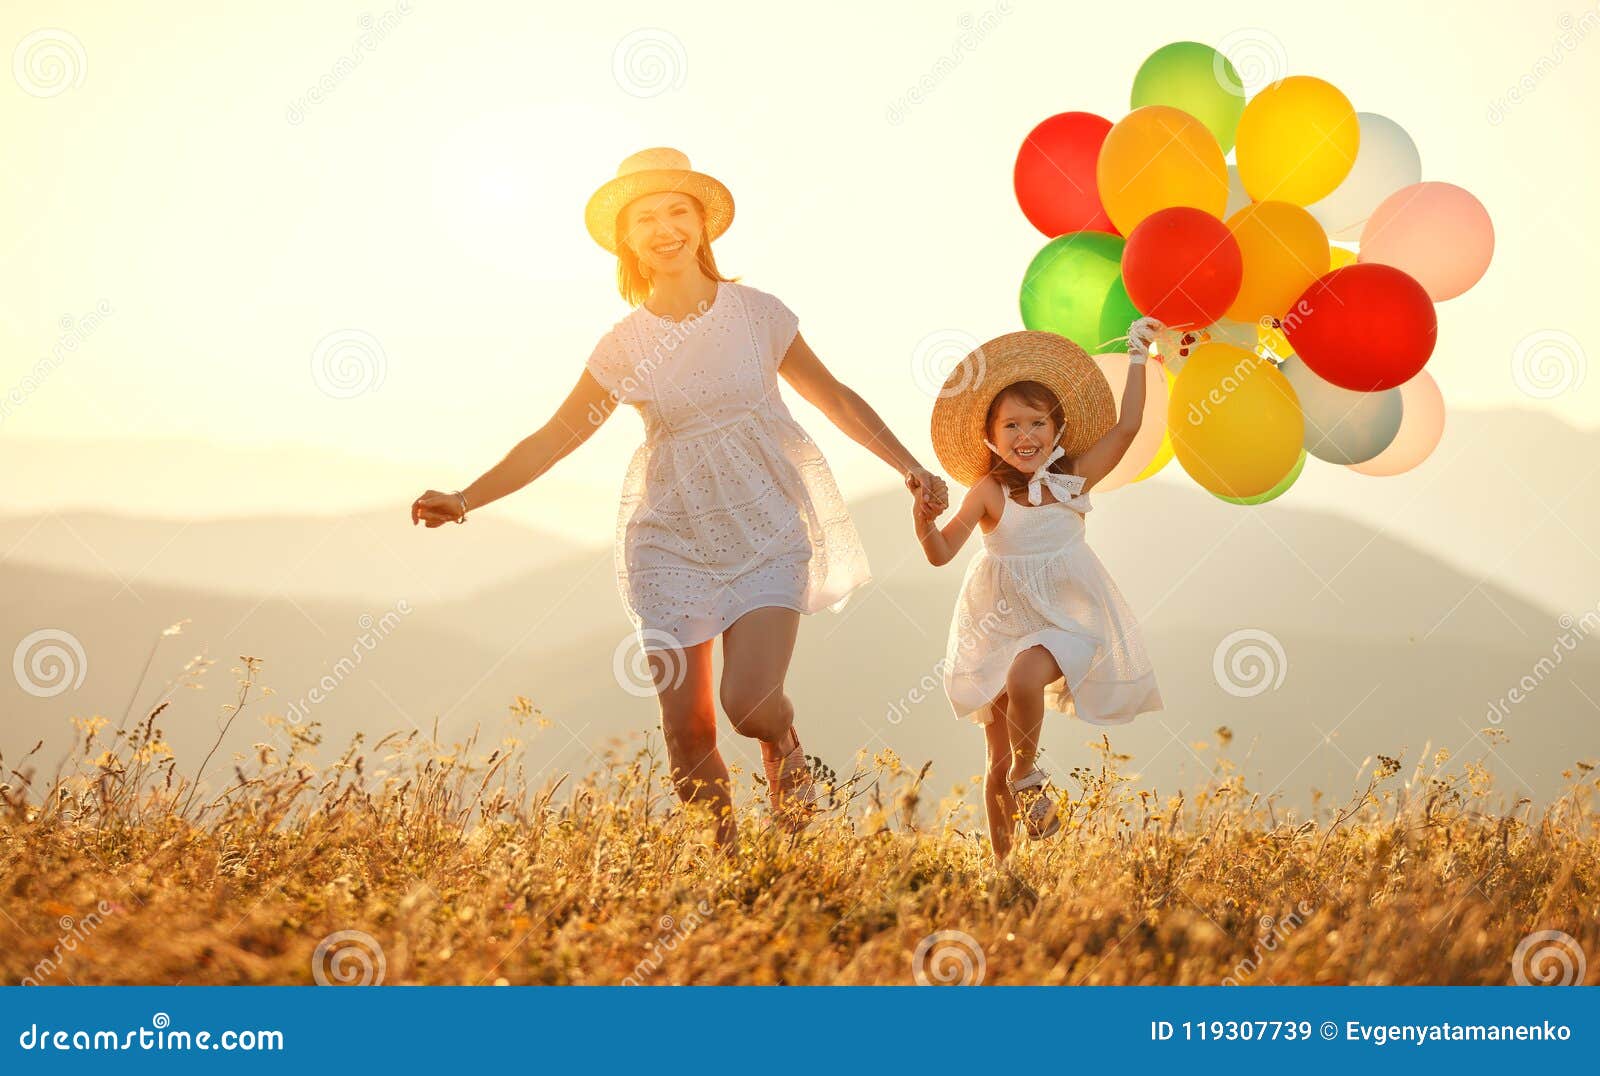 99,496 Child Summer Dress Stock Photos - Free & Royalty-Free Stock Photos  from Dreamstime